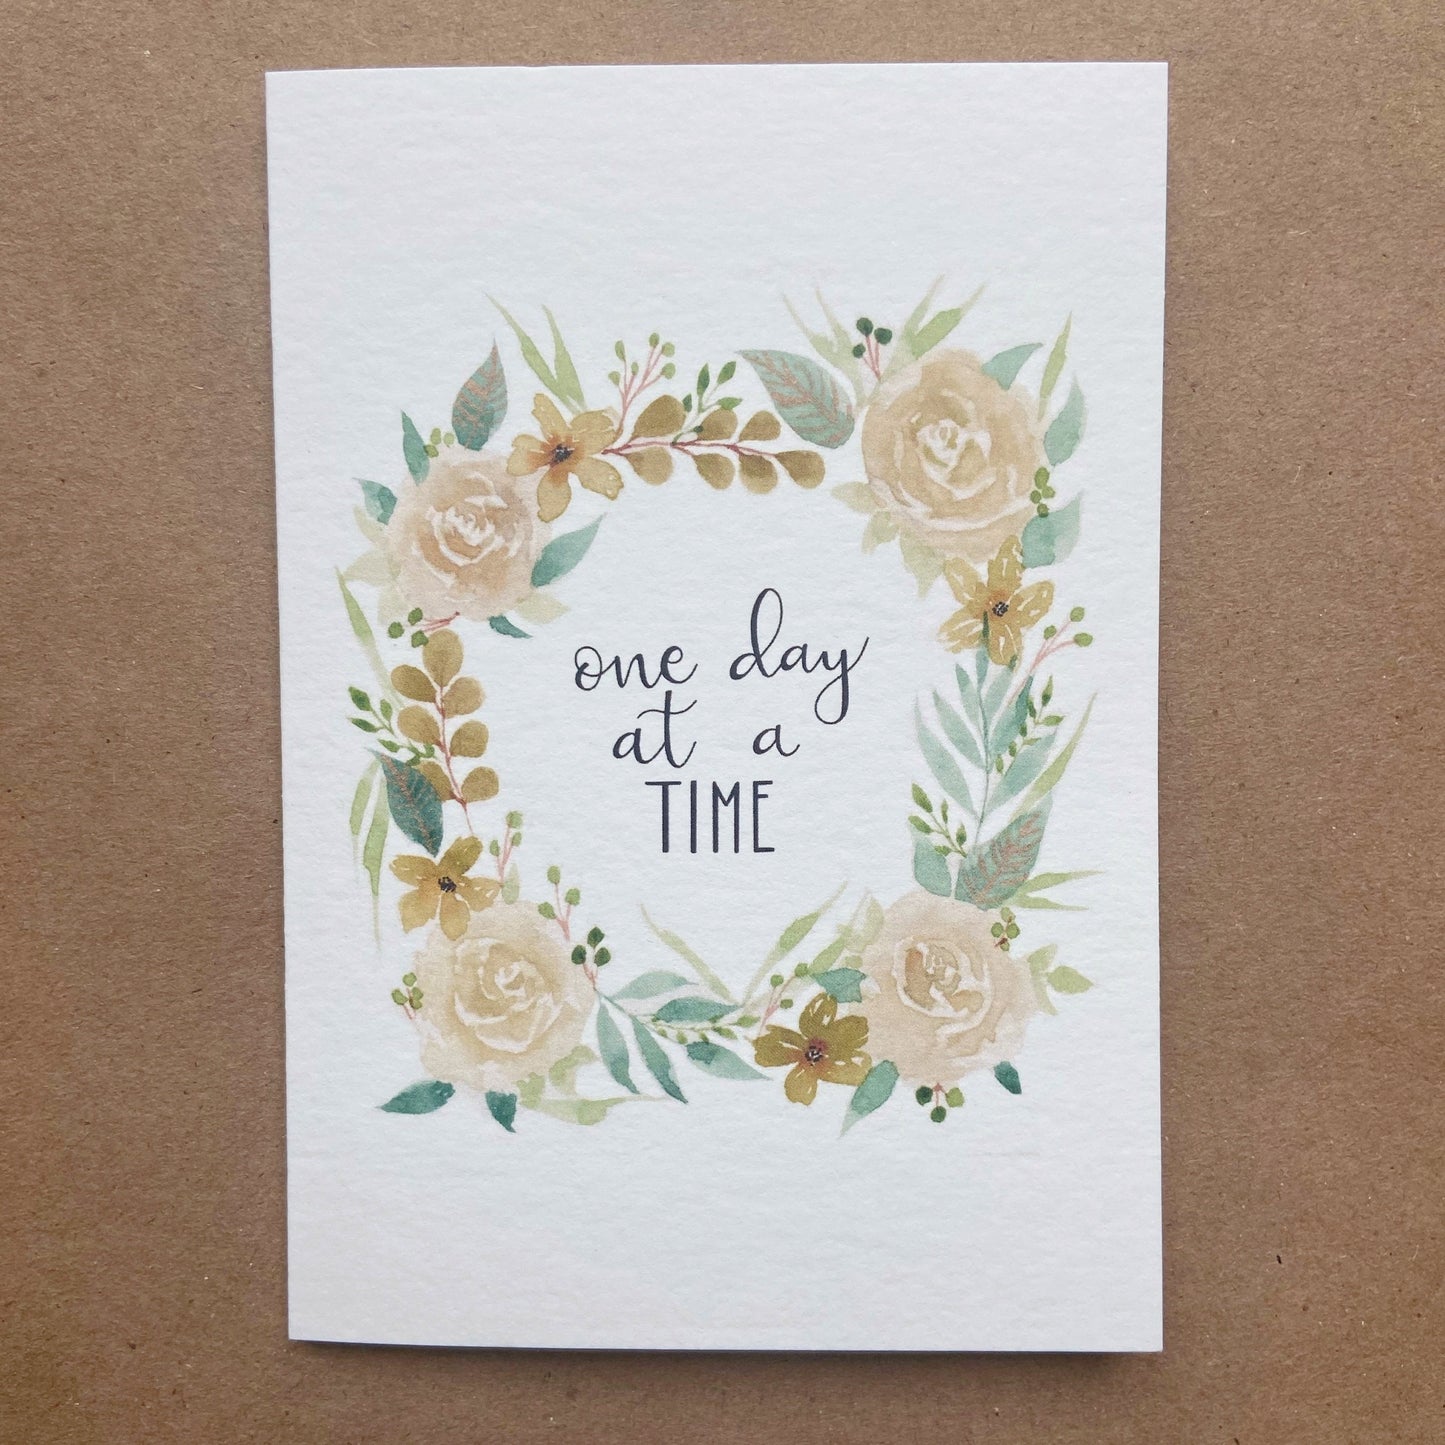 Friendlier Cards - One Day At A Time